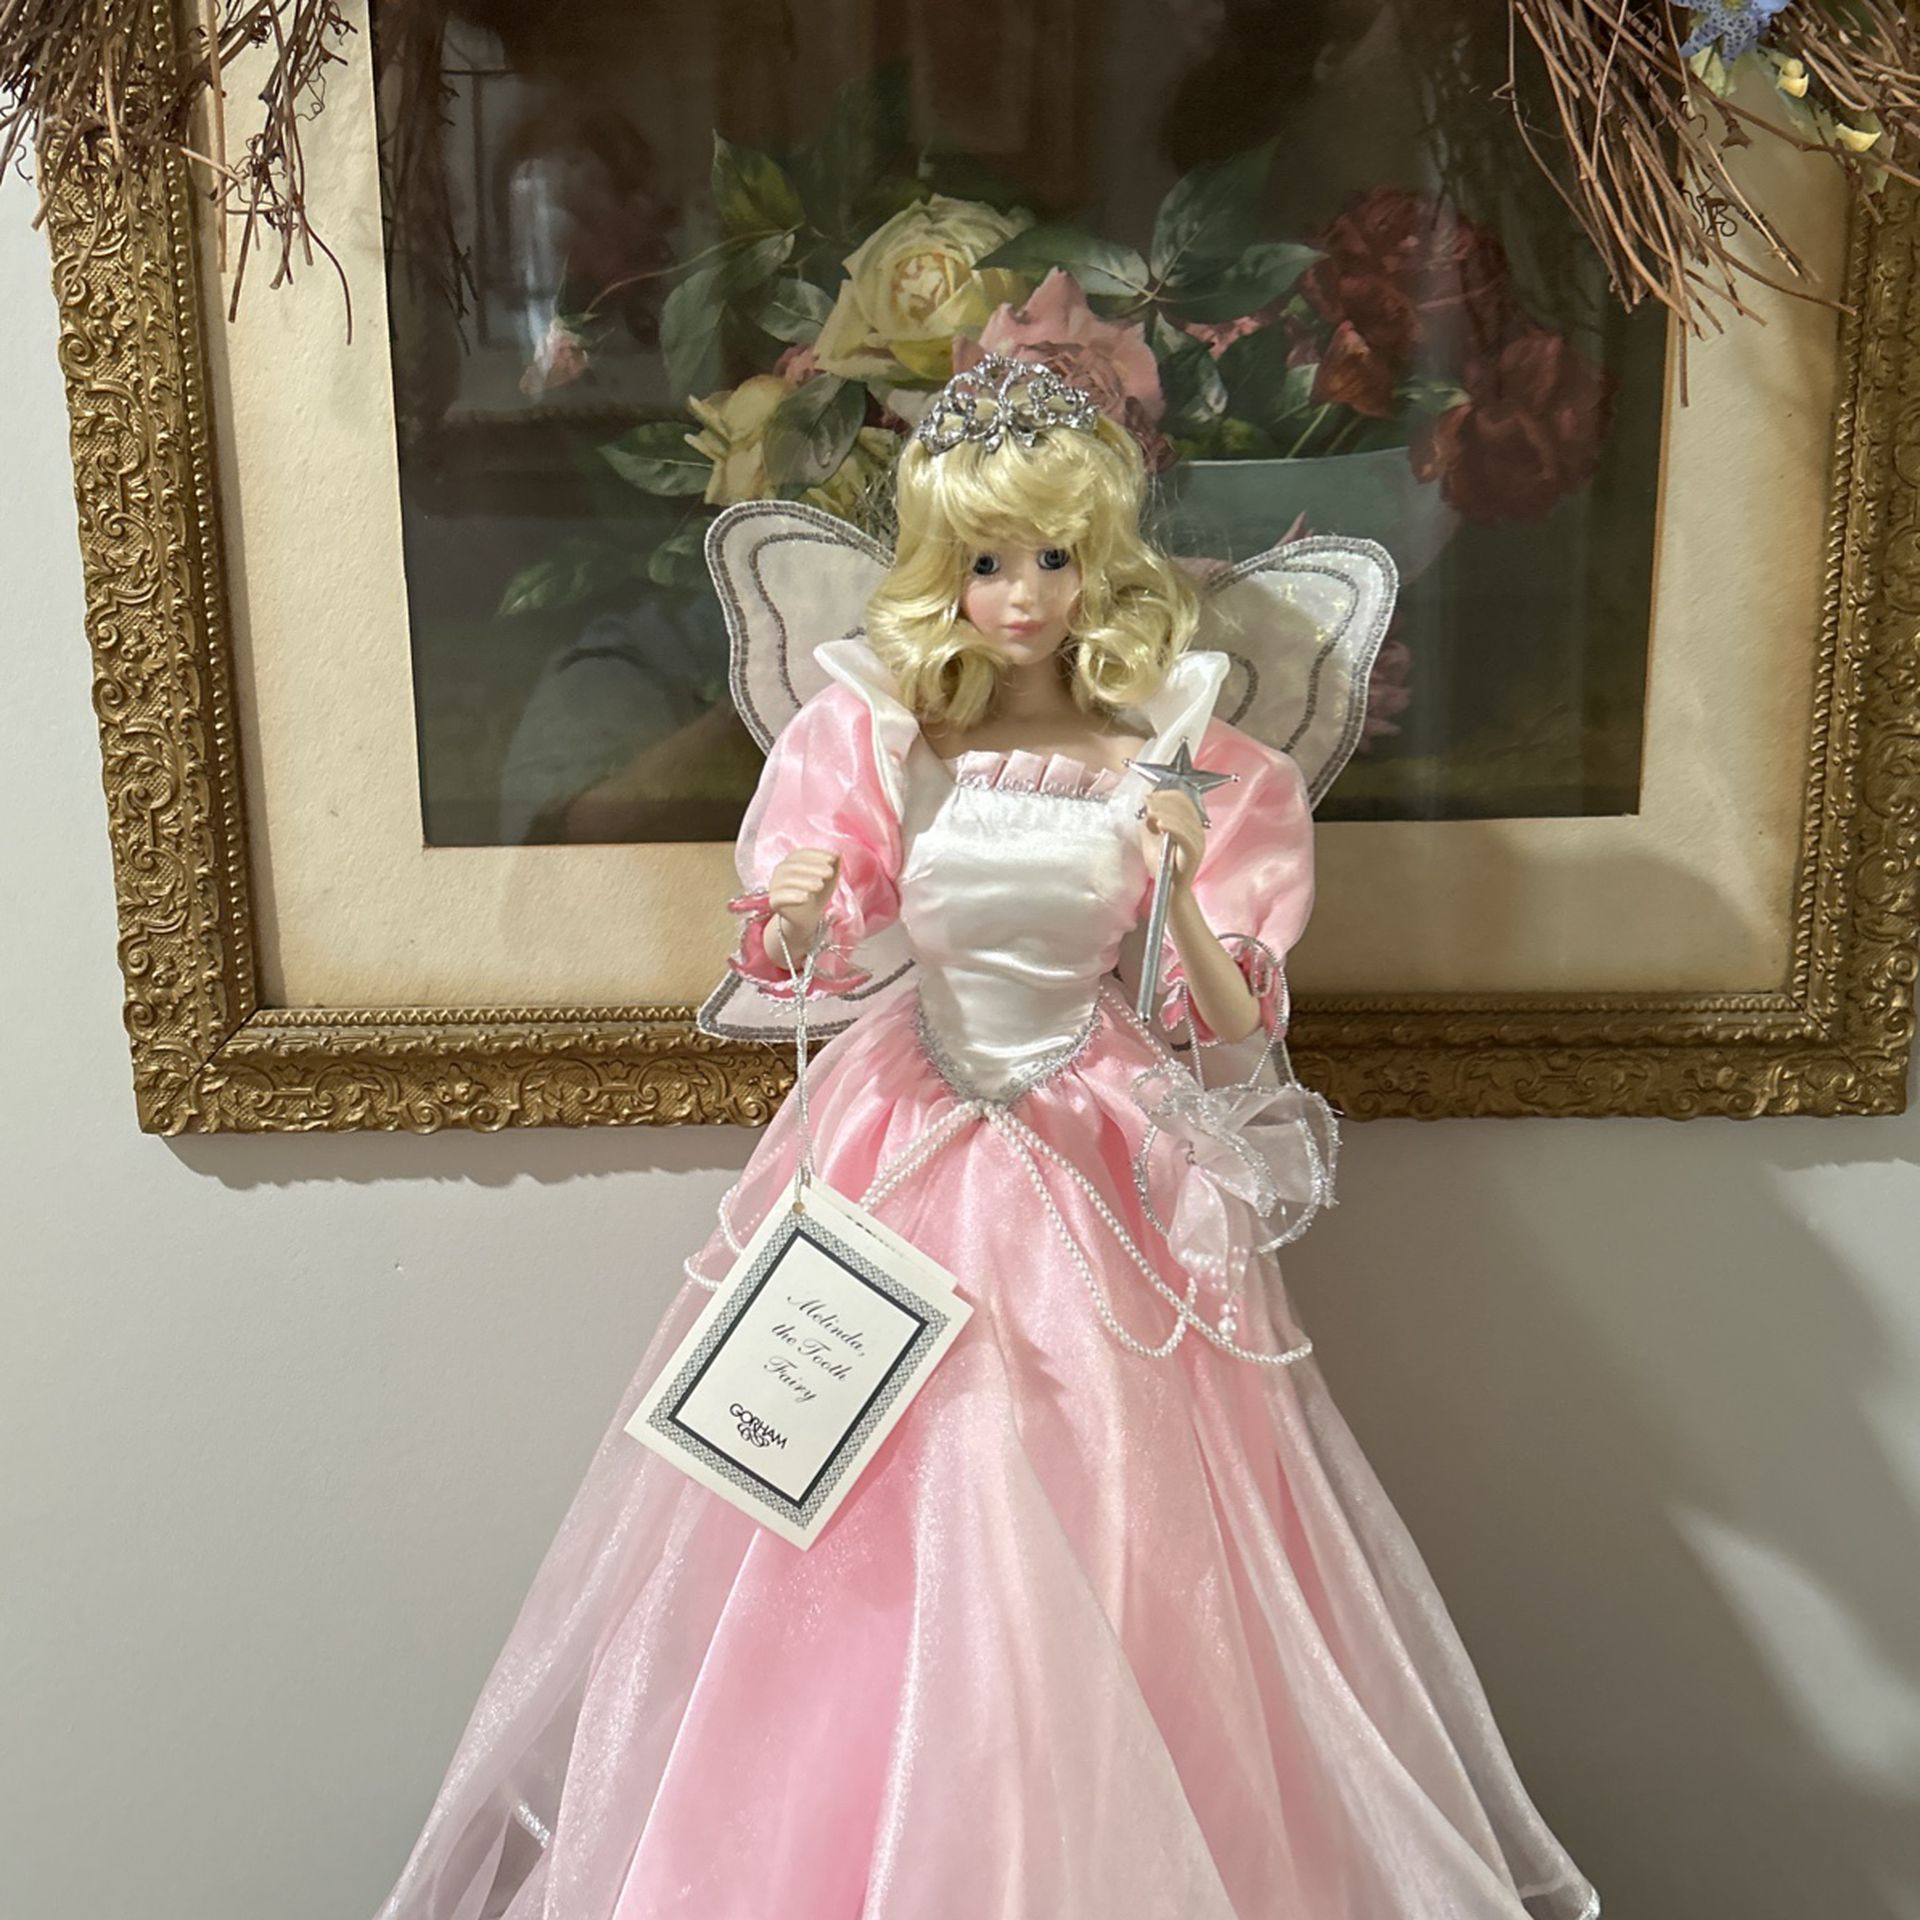 Gorgeous!!! Porcelain Fairy Princess Doll Dressed In Lavish Pink Satin With Pearls, Wings, Wand, & Crown 